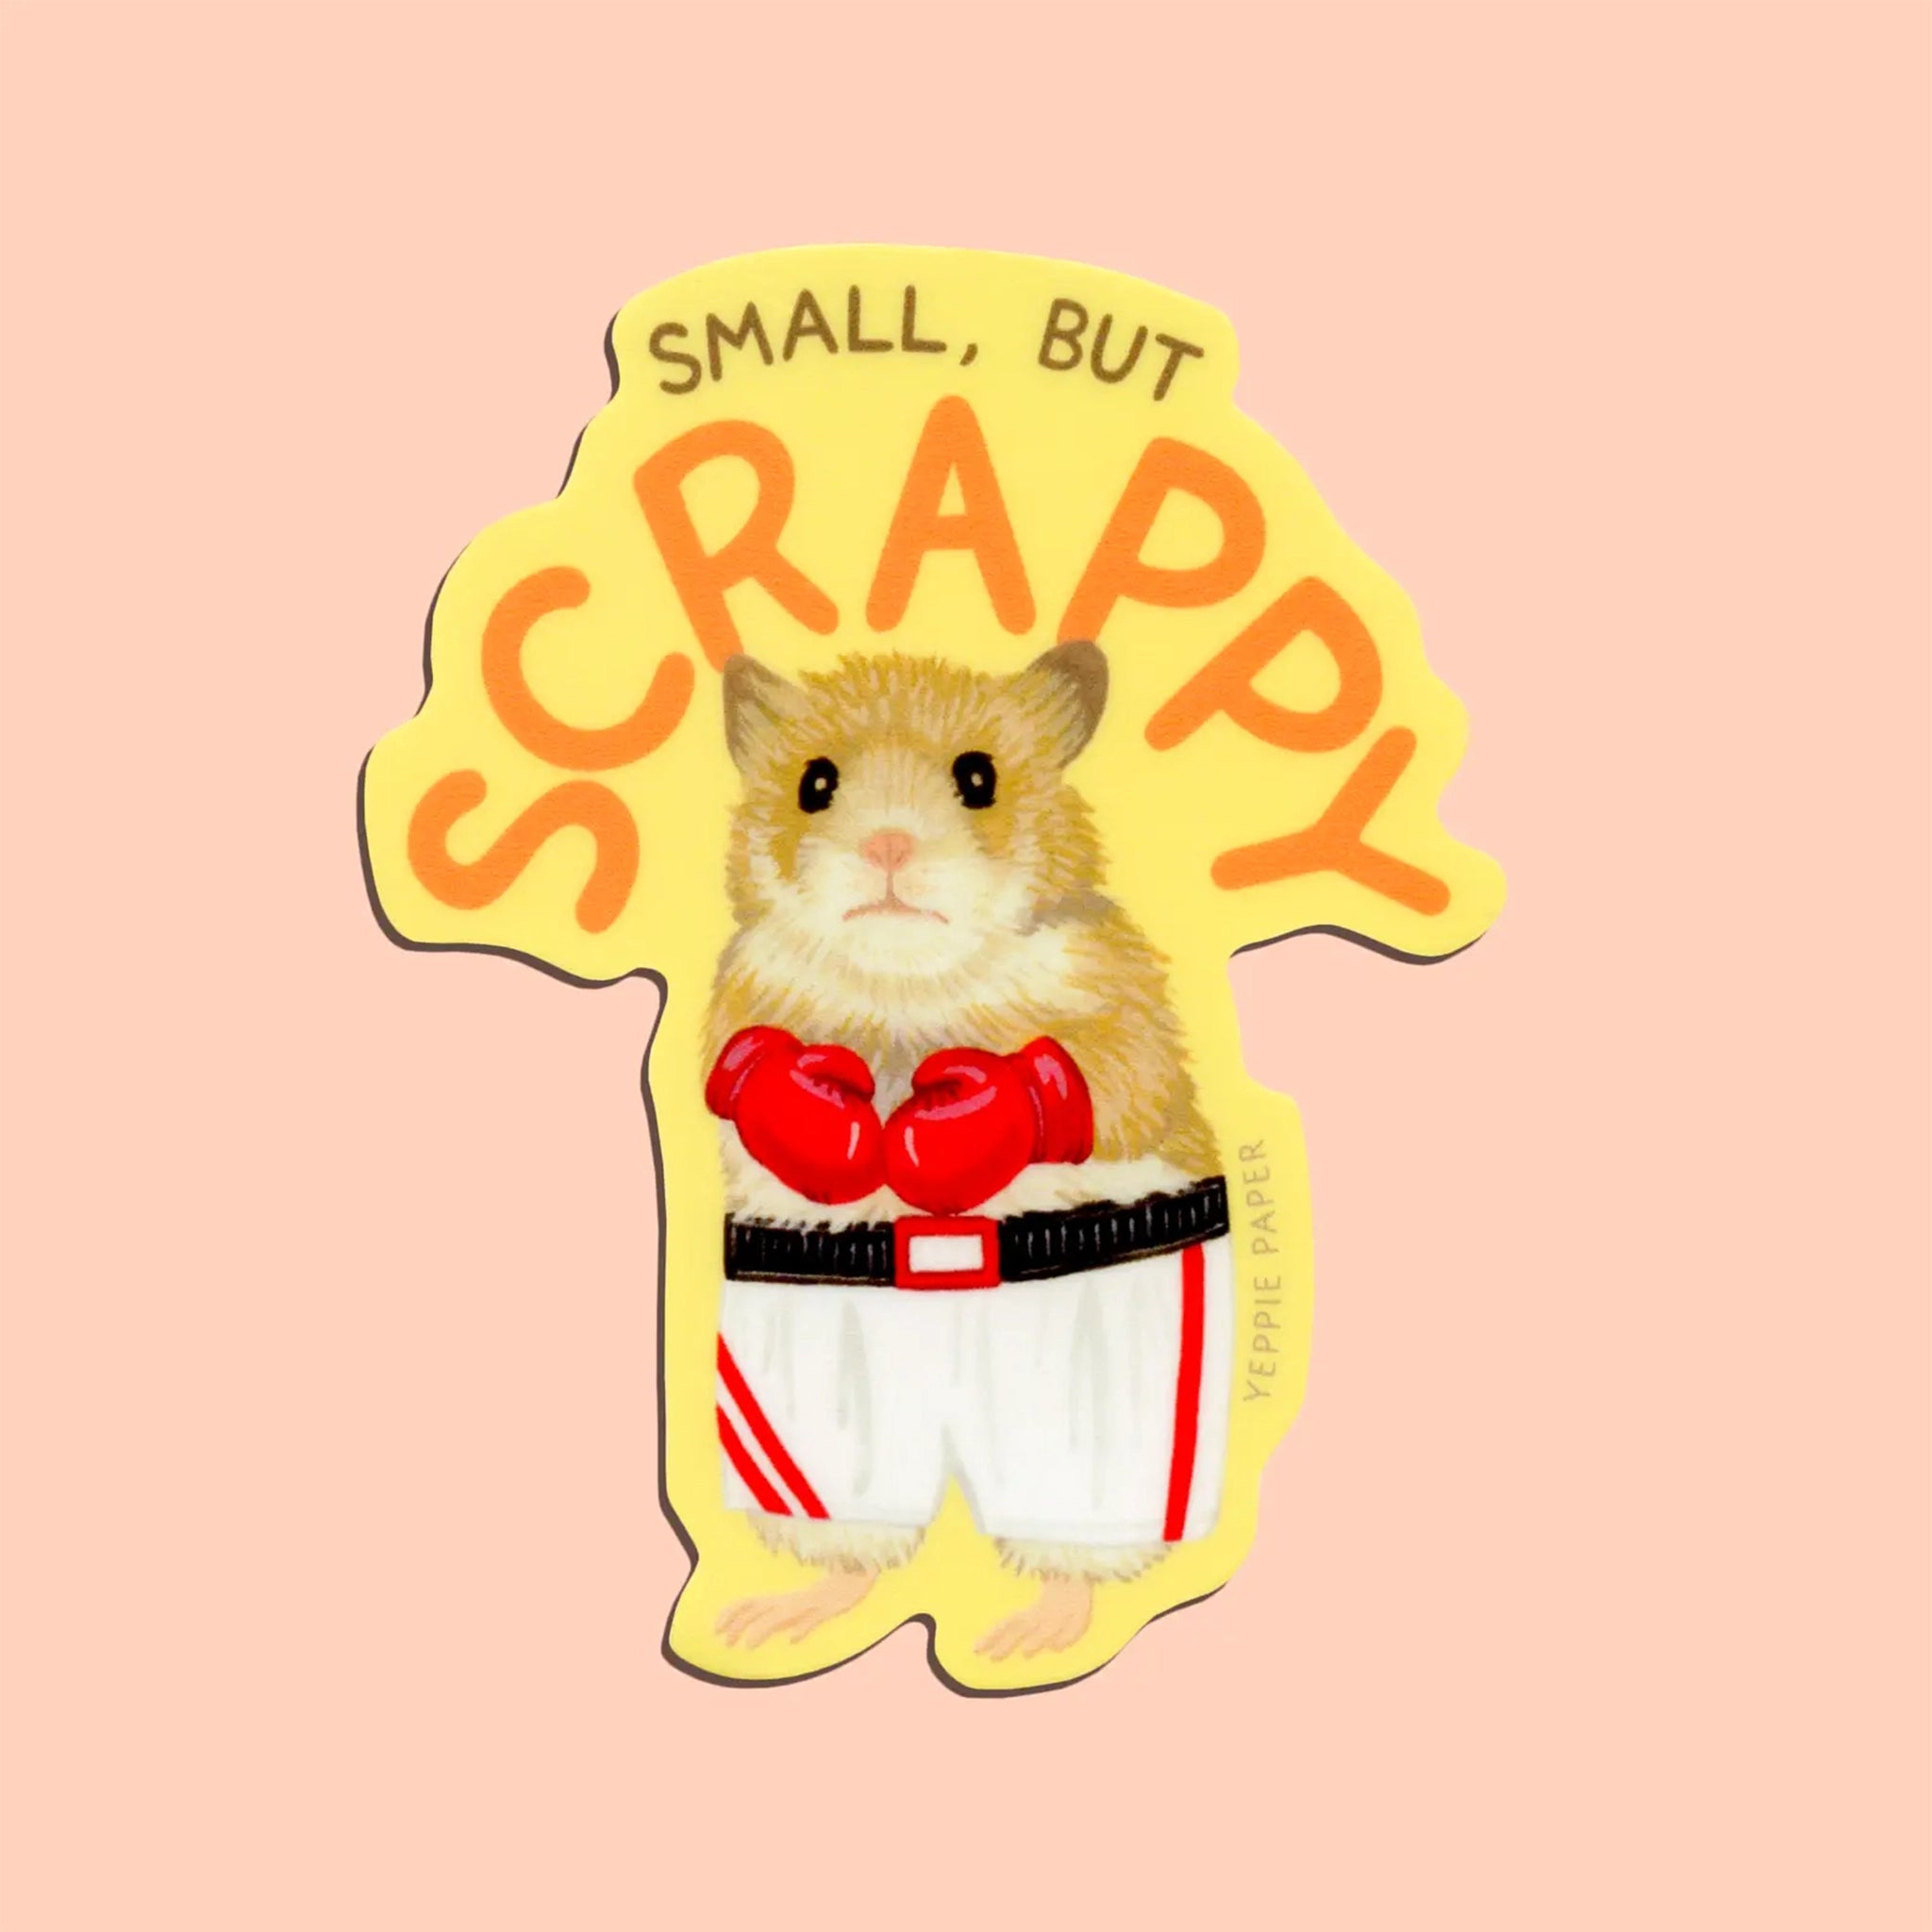 On a peachy background is a light yellow sticker with an illustration of a hamster suited up in boxing gear along with text above it that reads, "Small, but Scrappy".